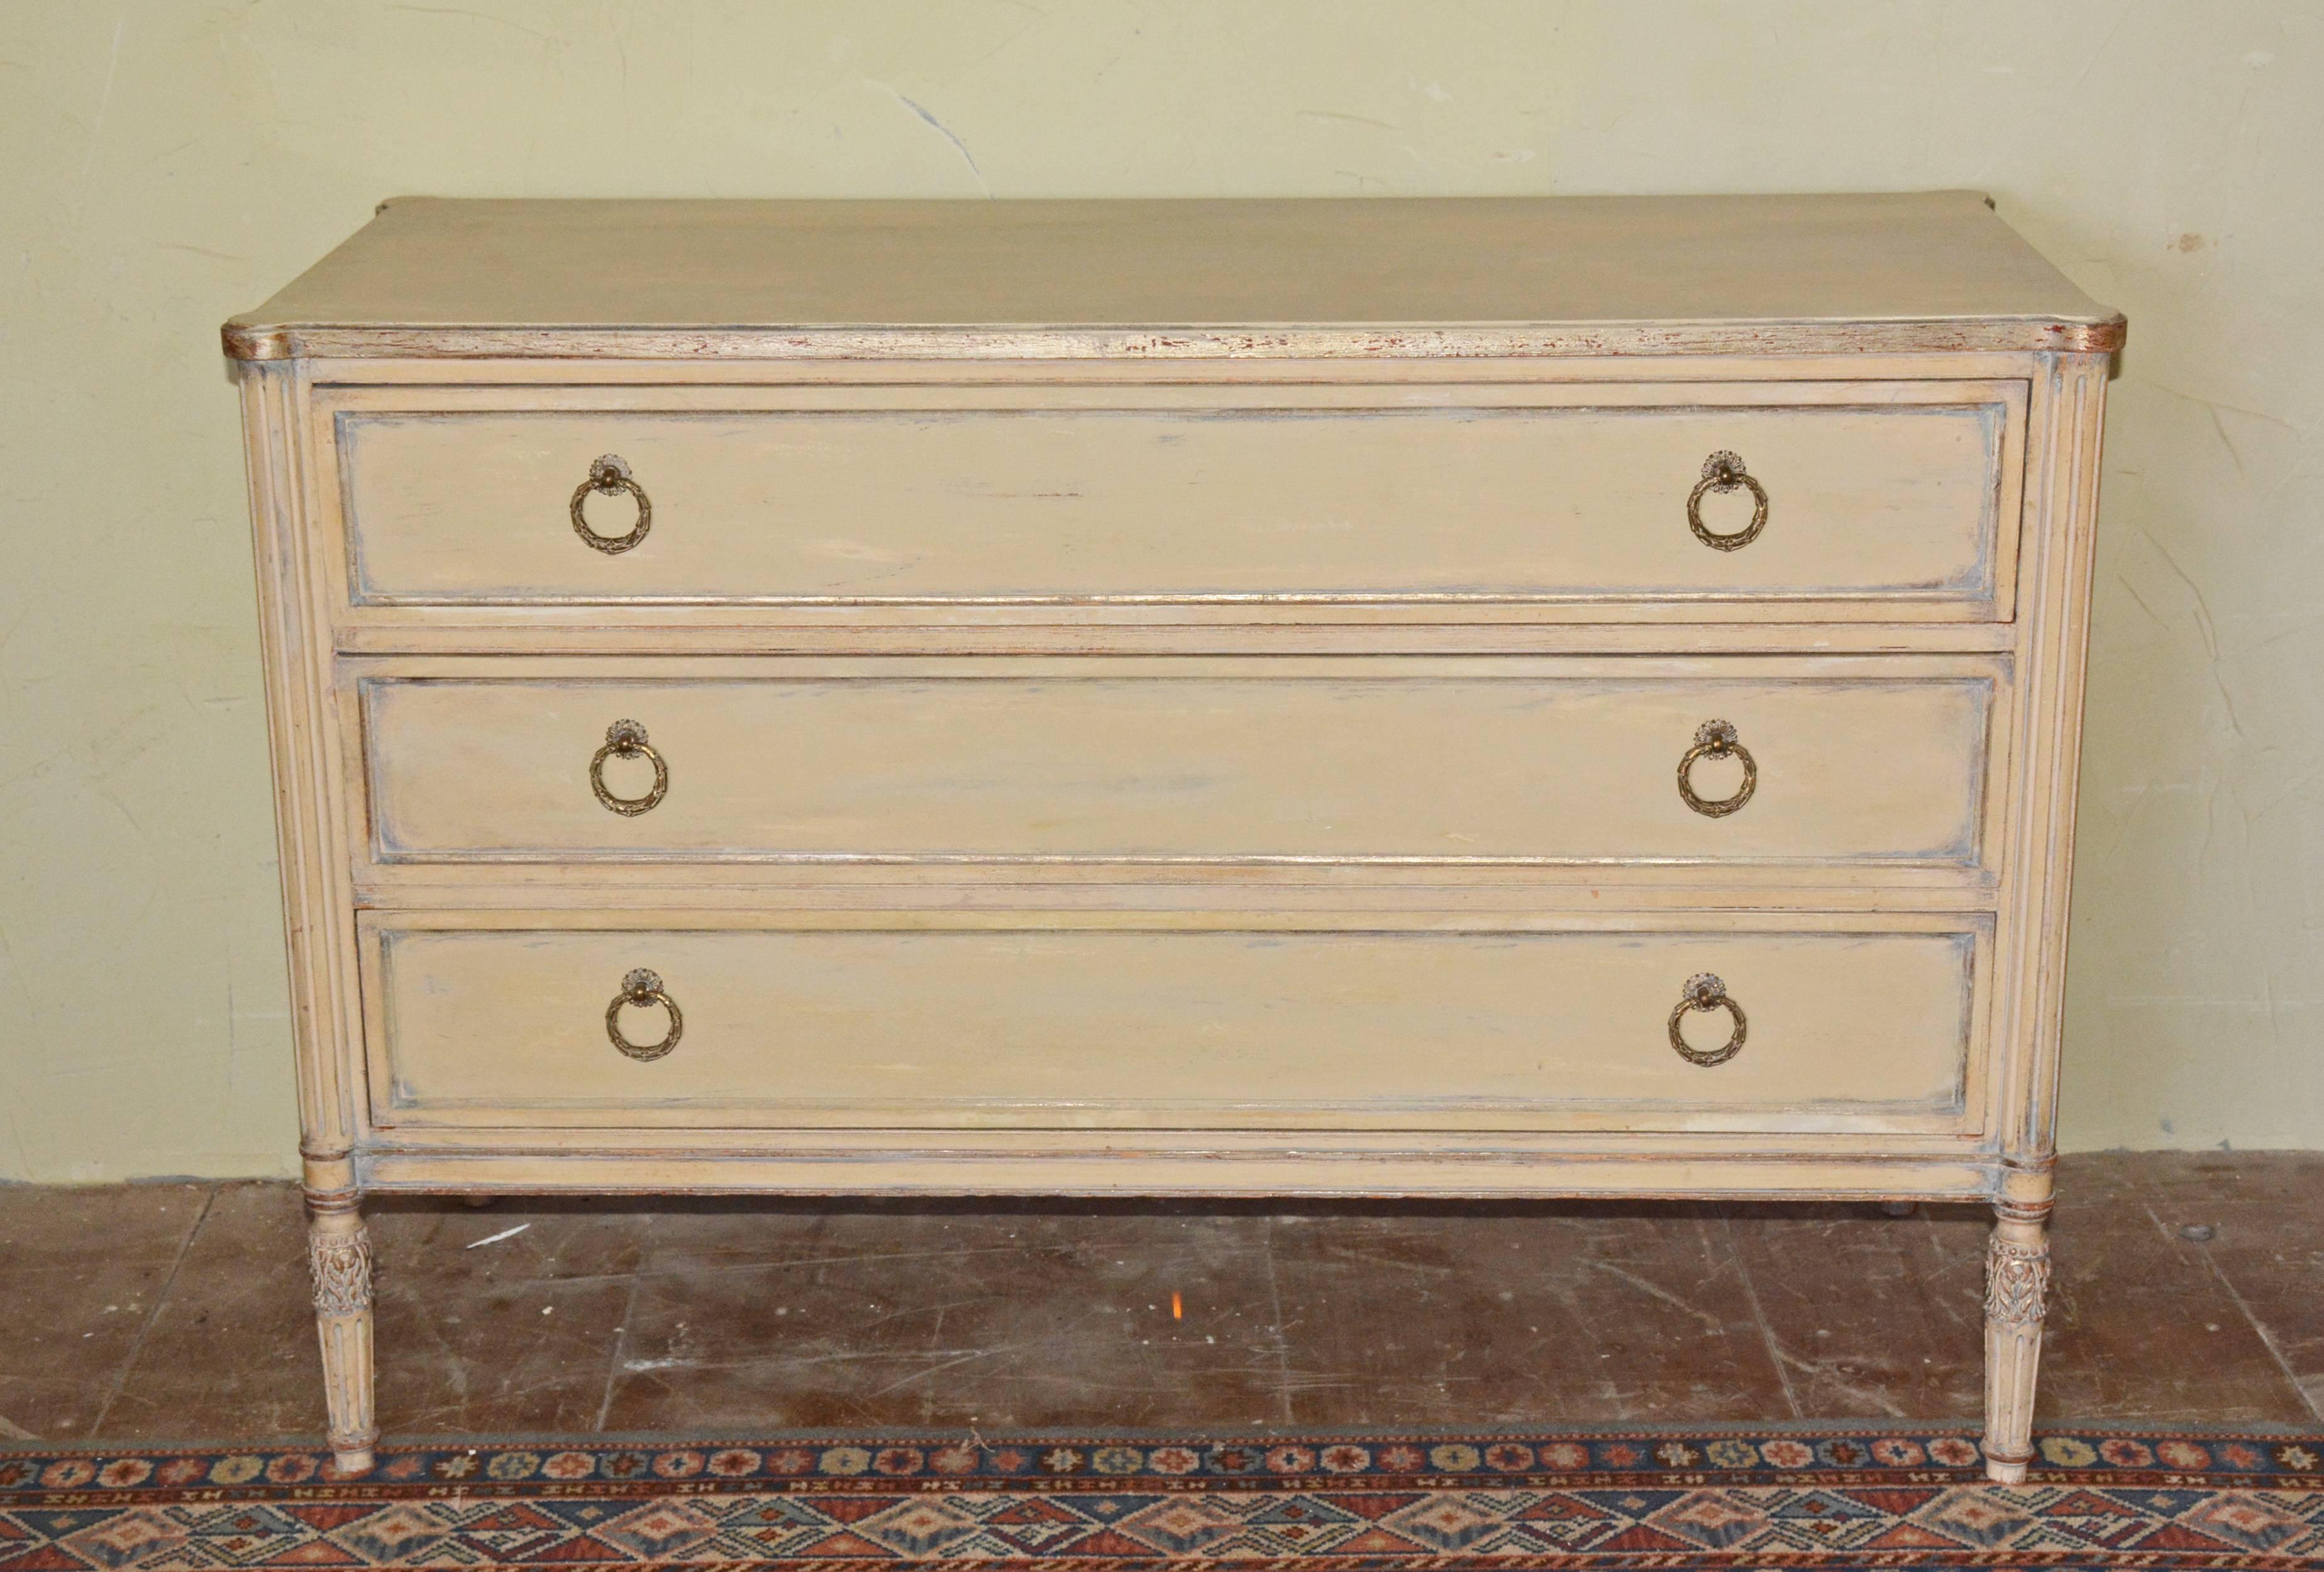 The Louis XVI-style, three-drawer chest or dresser is cream colored trimmed with silver gilt edging the top and framing the front of each drawer. Fluted legs and rounded fluted pilasters decorate each of the four corners. A pair of brass bay berry